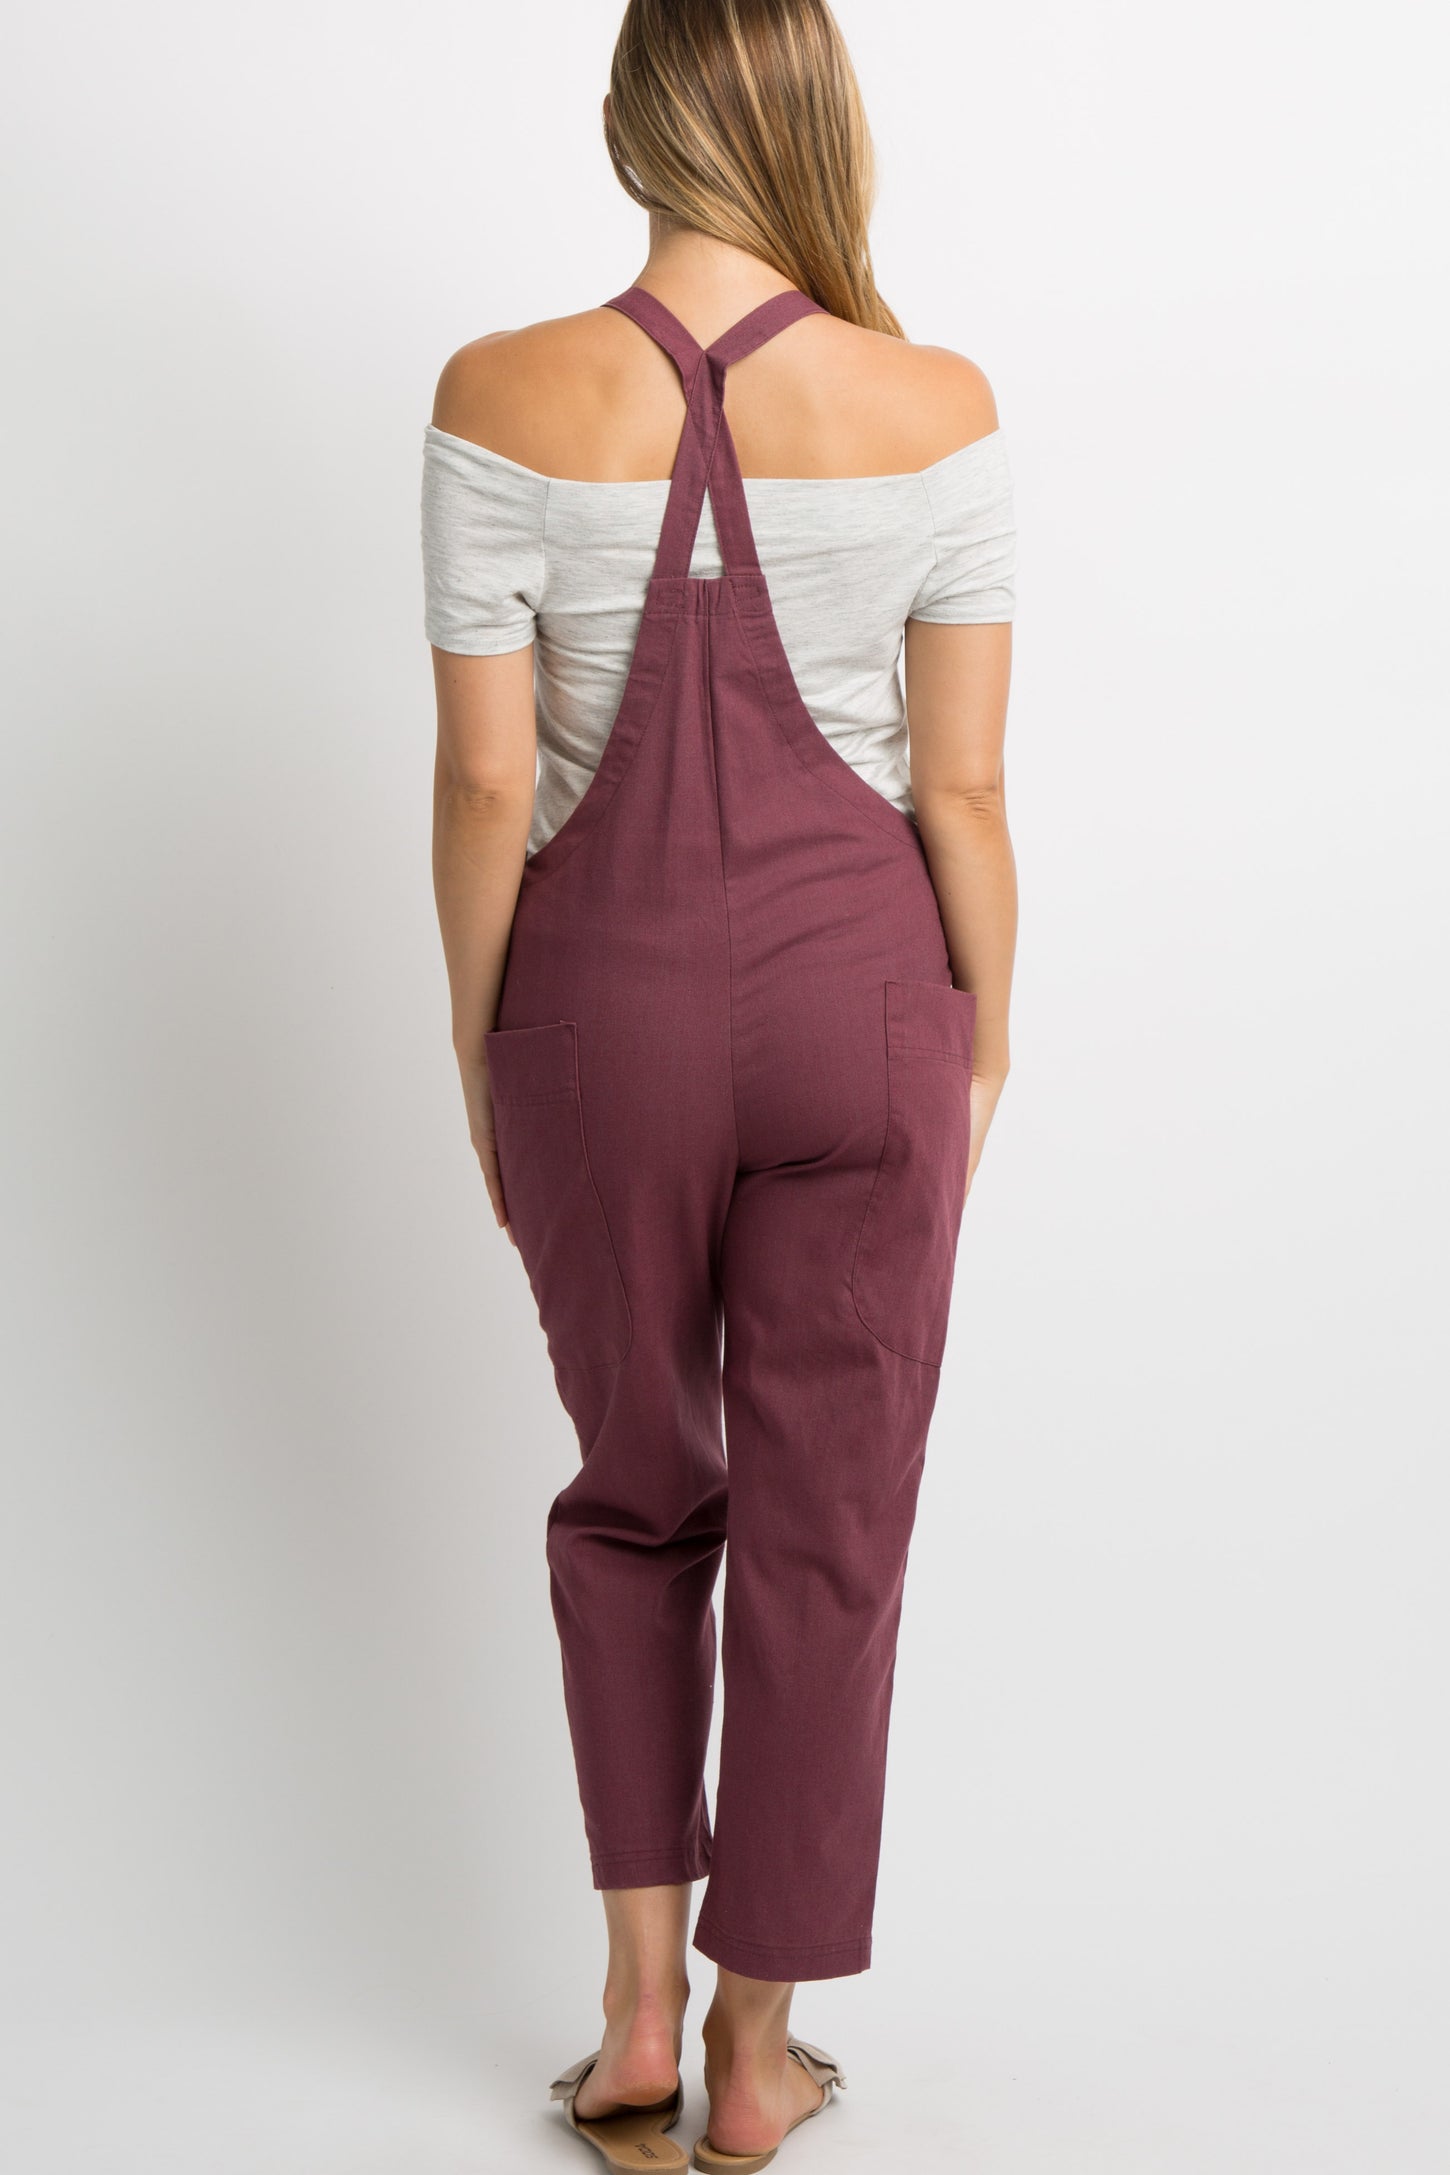 Carbon 38 Maroon Textured Detail Leggings- Size S (Inseam 28 1/2”) – The  Saved Collection